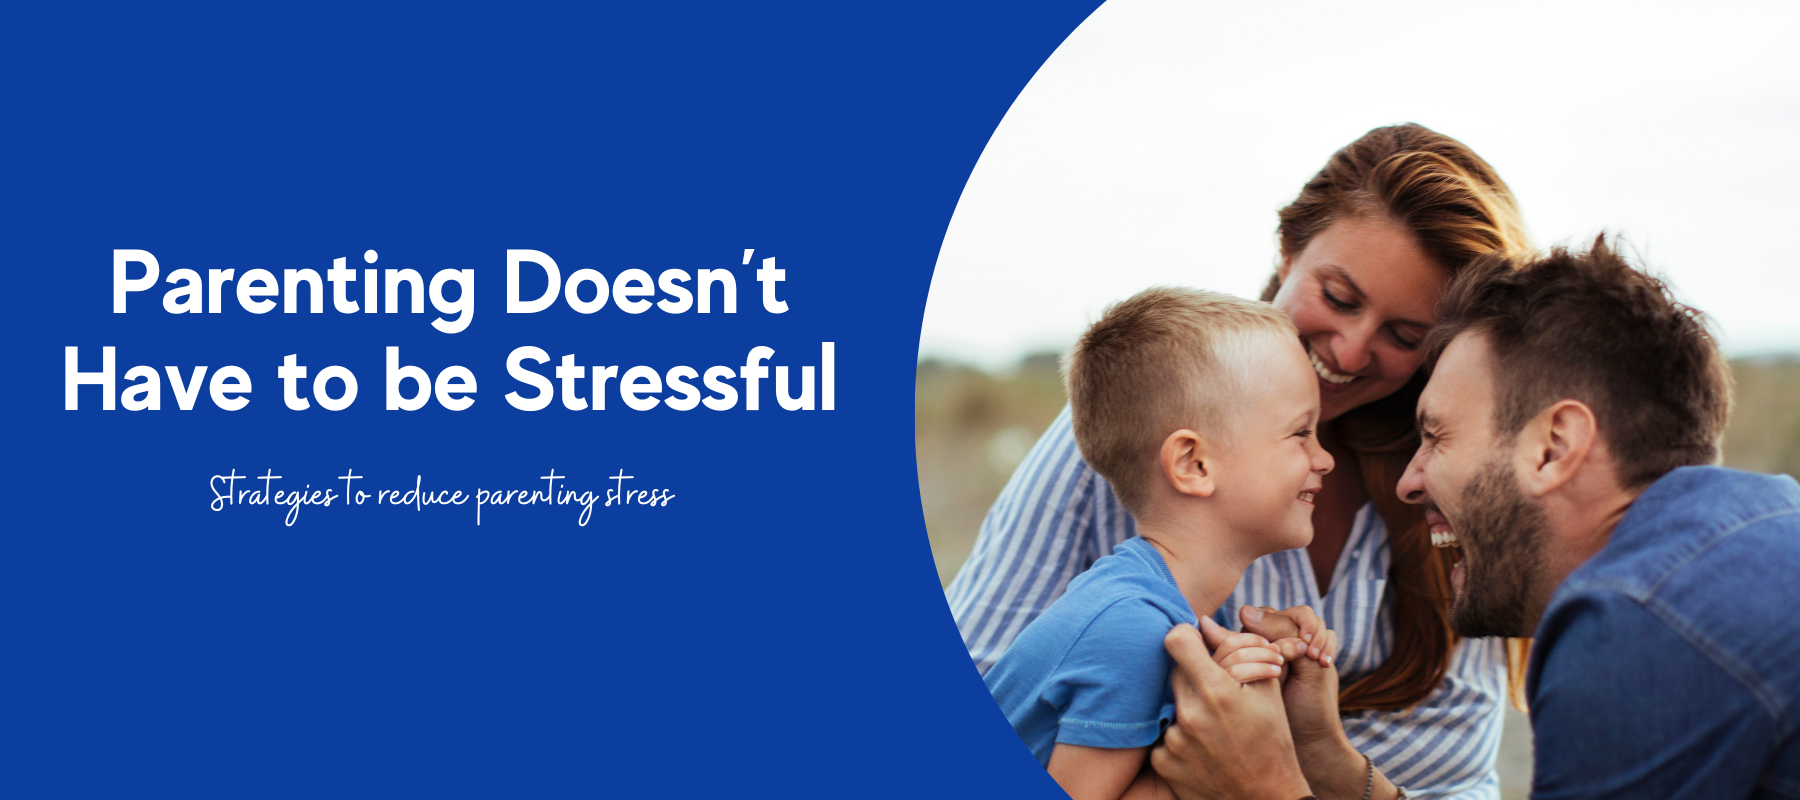 Parenting Doesn’t Have to be Stressful